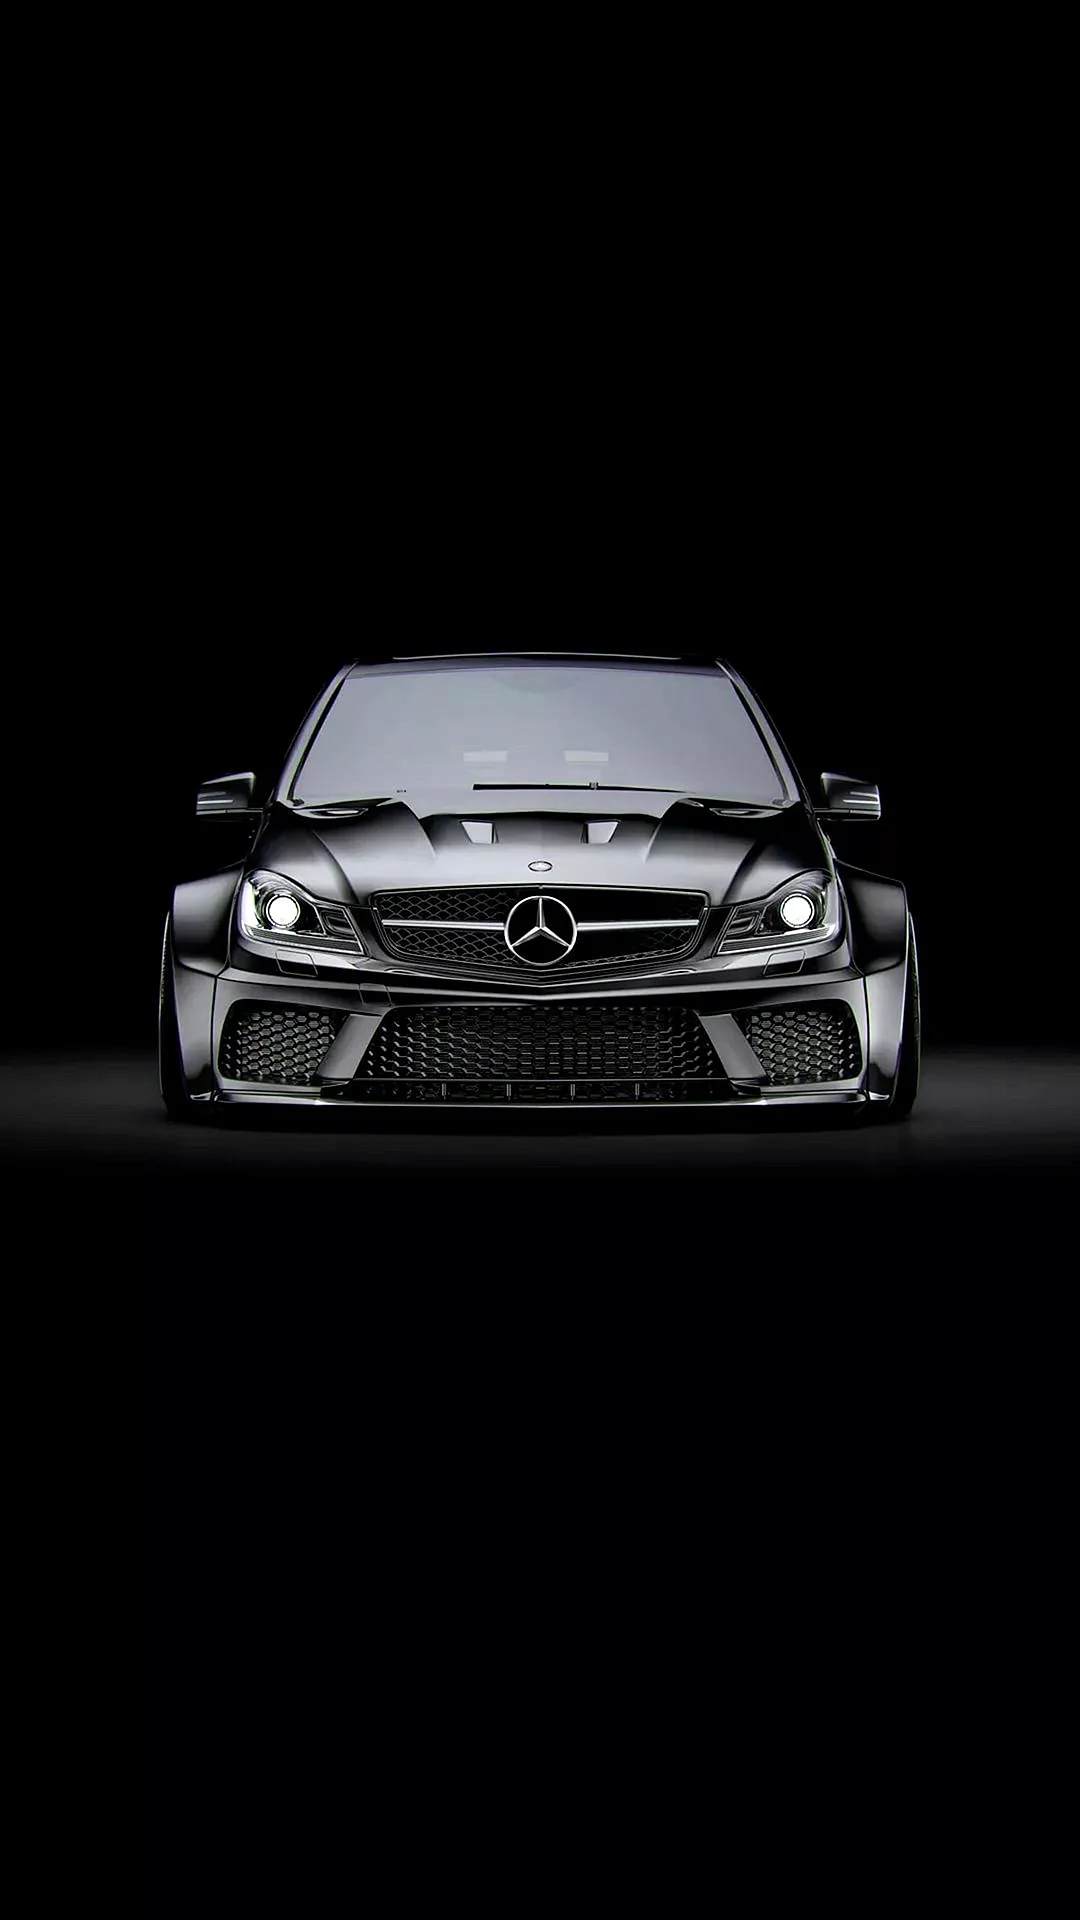 Bmw Mercedes iPhone Wallpaper For iPhone